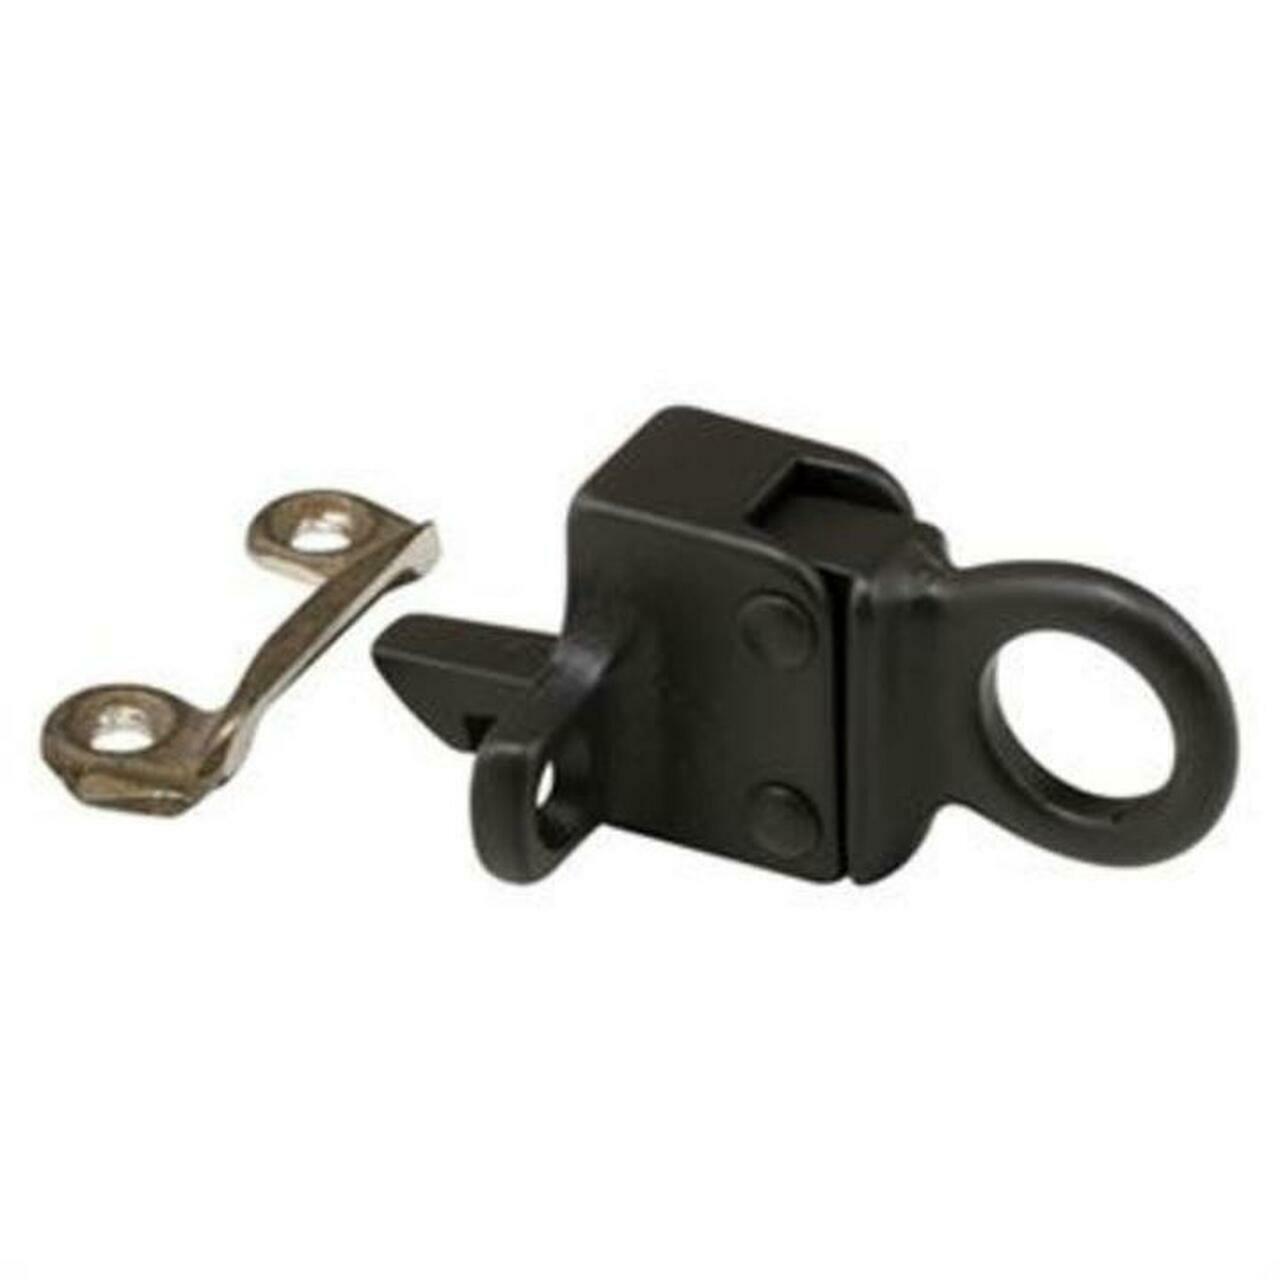 Awning & Hopper Window Latches